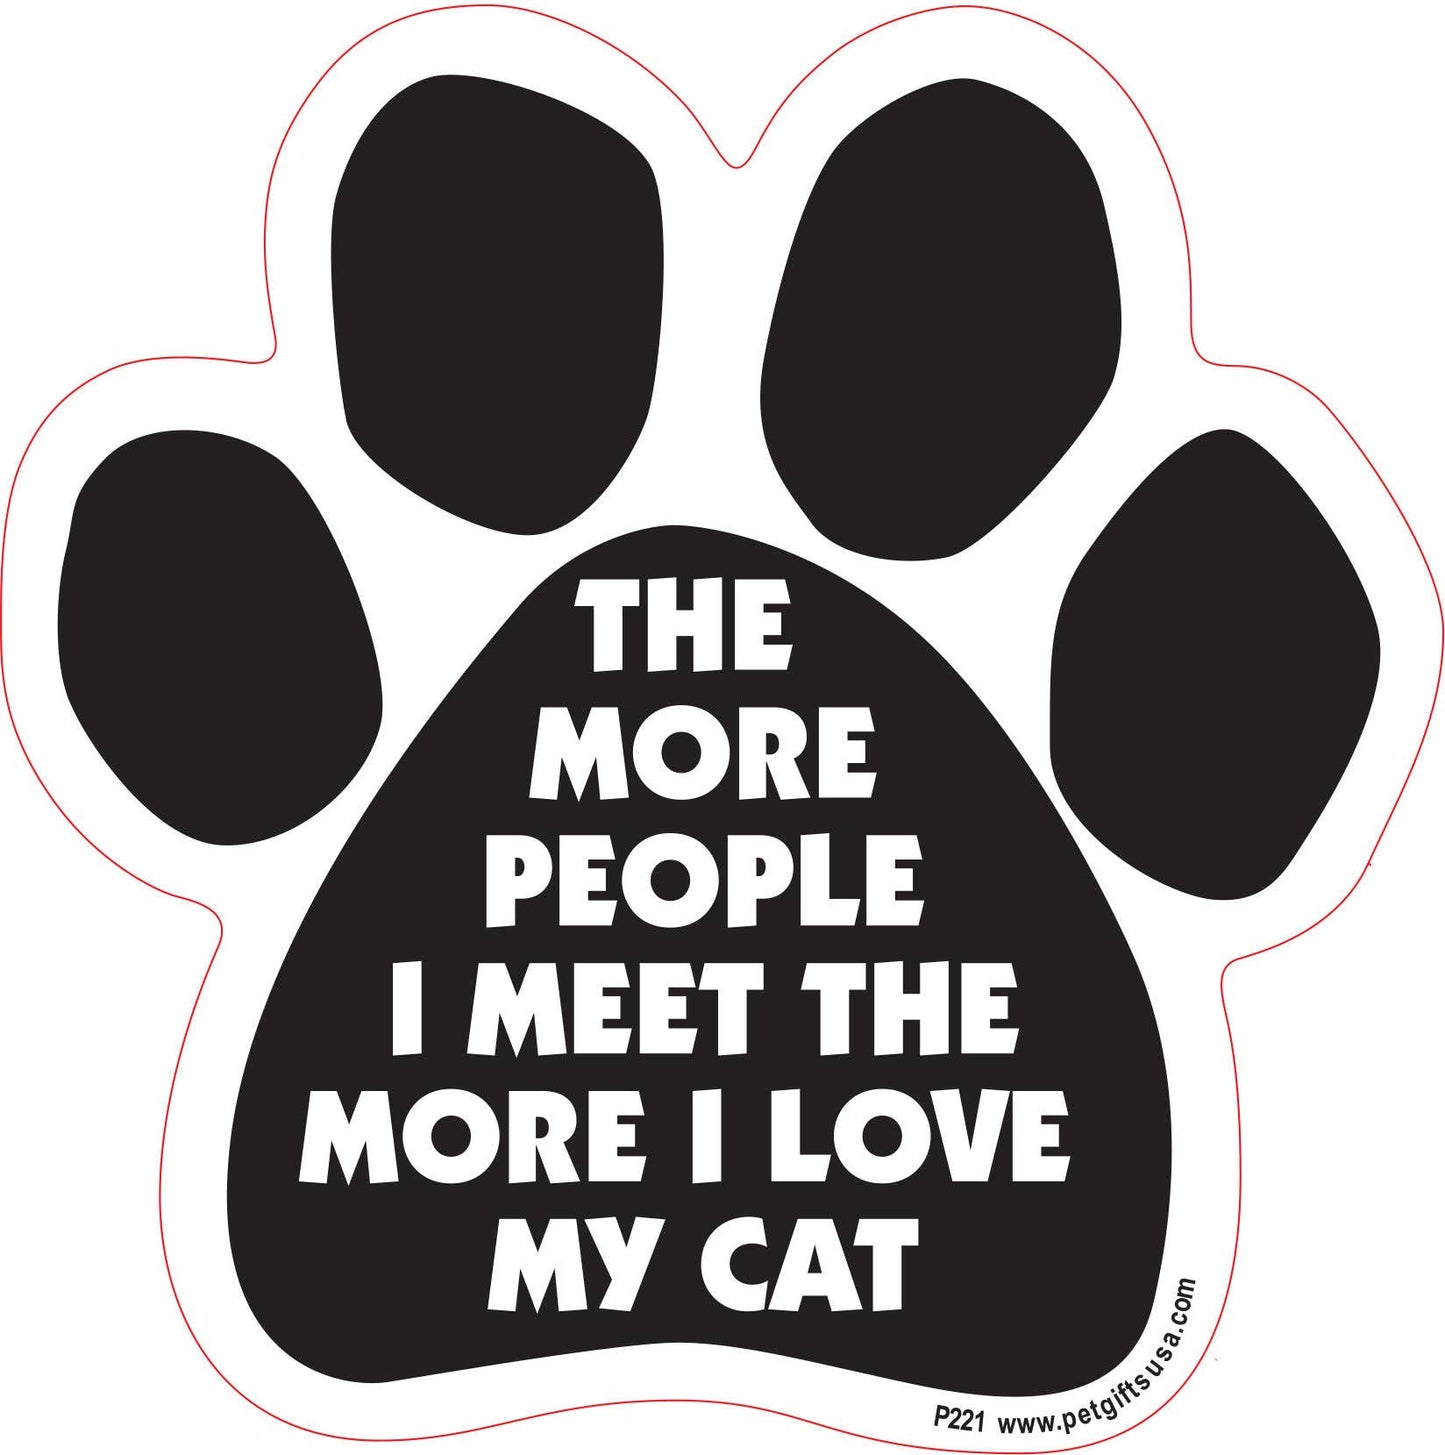 The More People I Meet the More I Love My Cat Paw Shaped Car Magnet